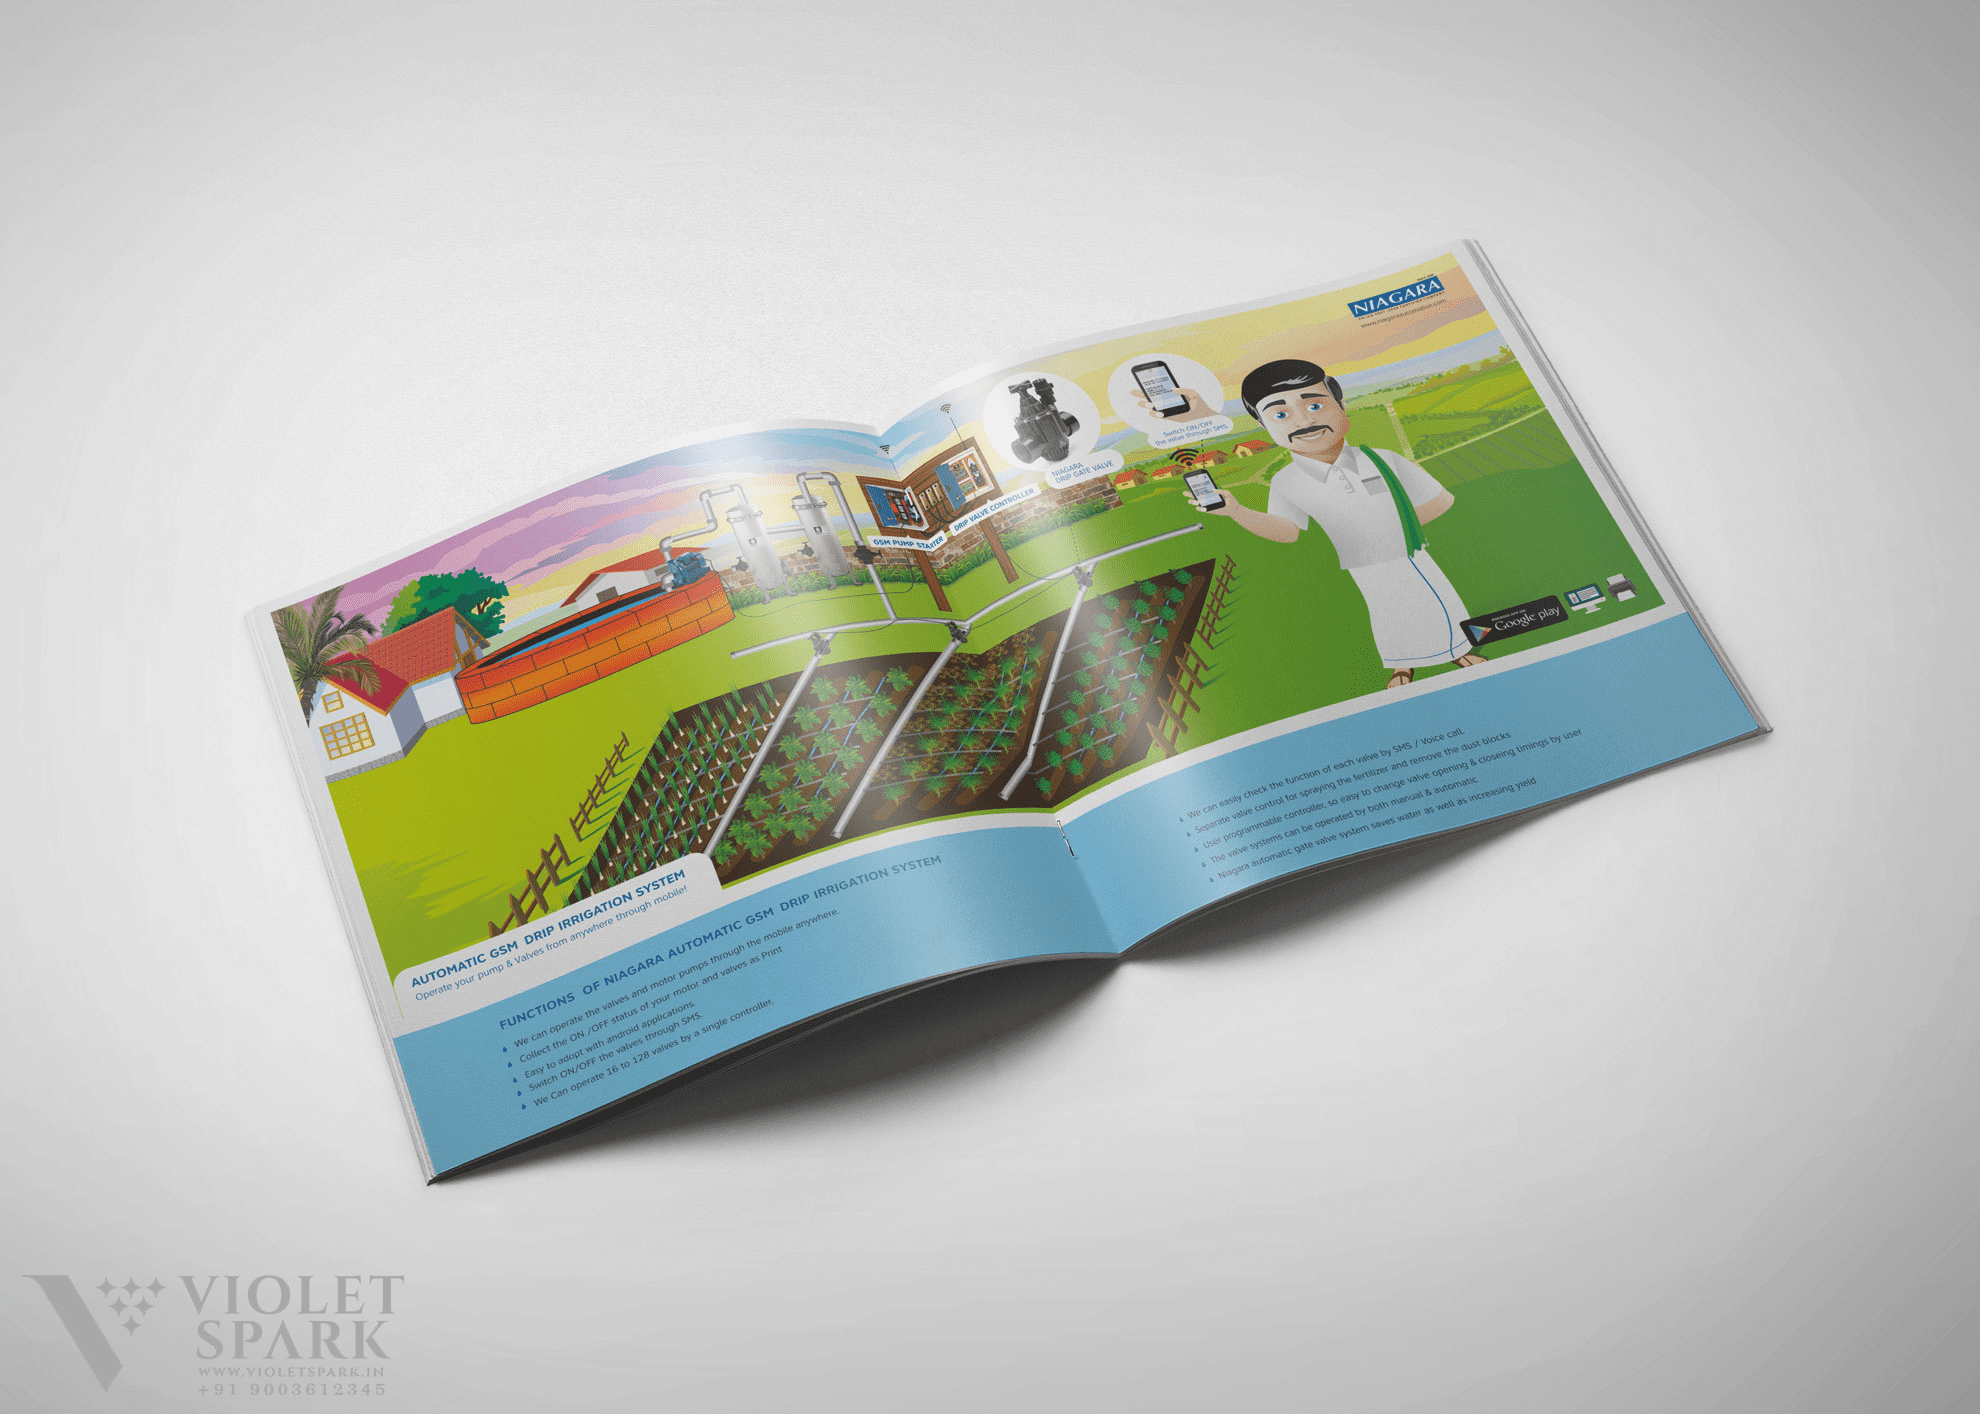 Niagara Solutions Brochure Inner Pages Branding Design Digital Marketing in Coimbatore by Violet Spark